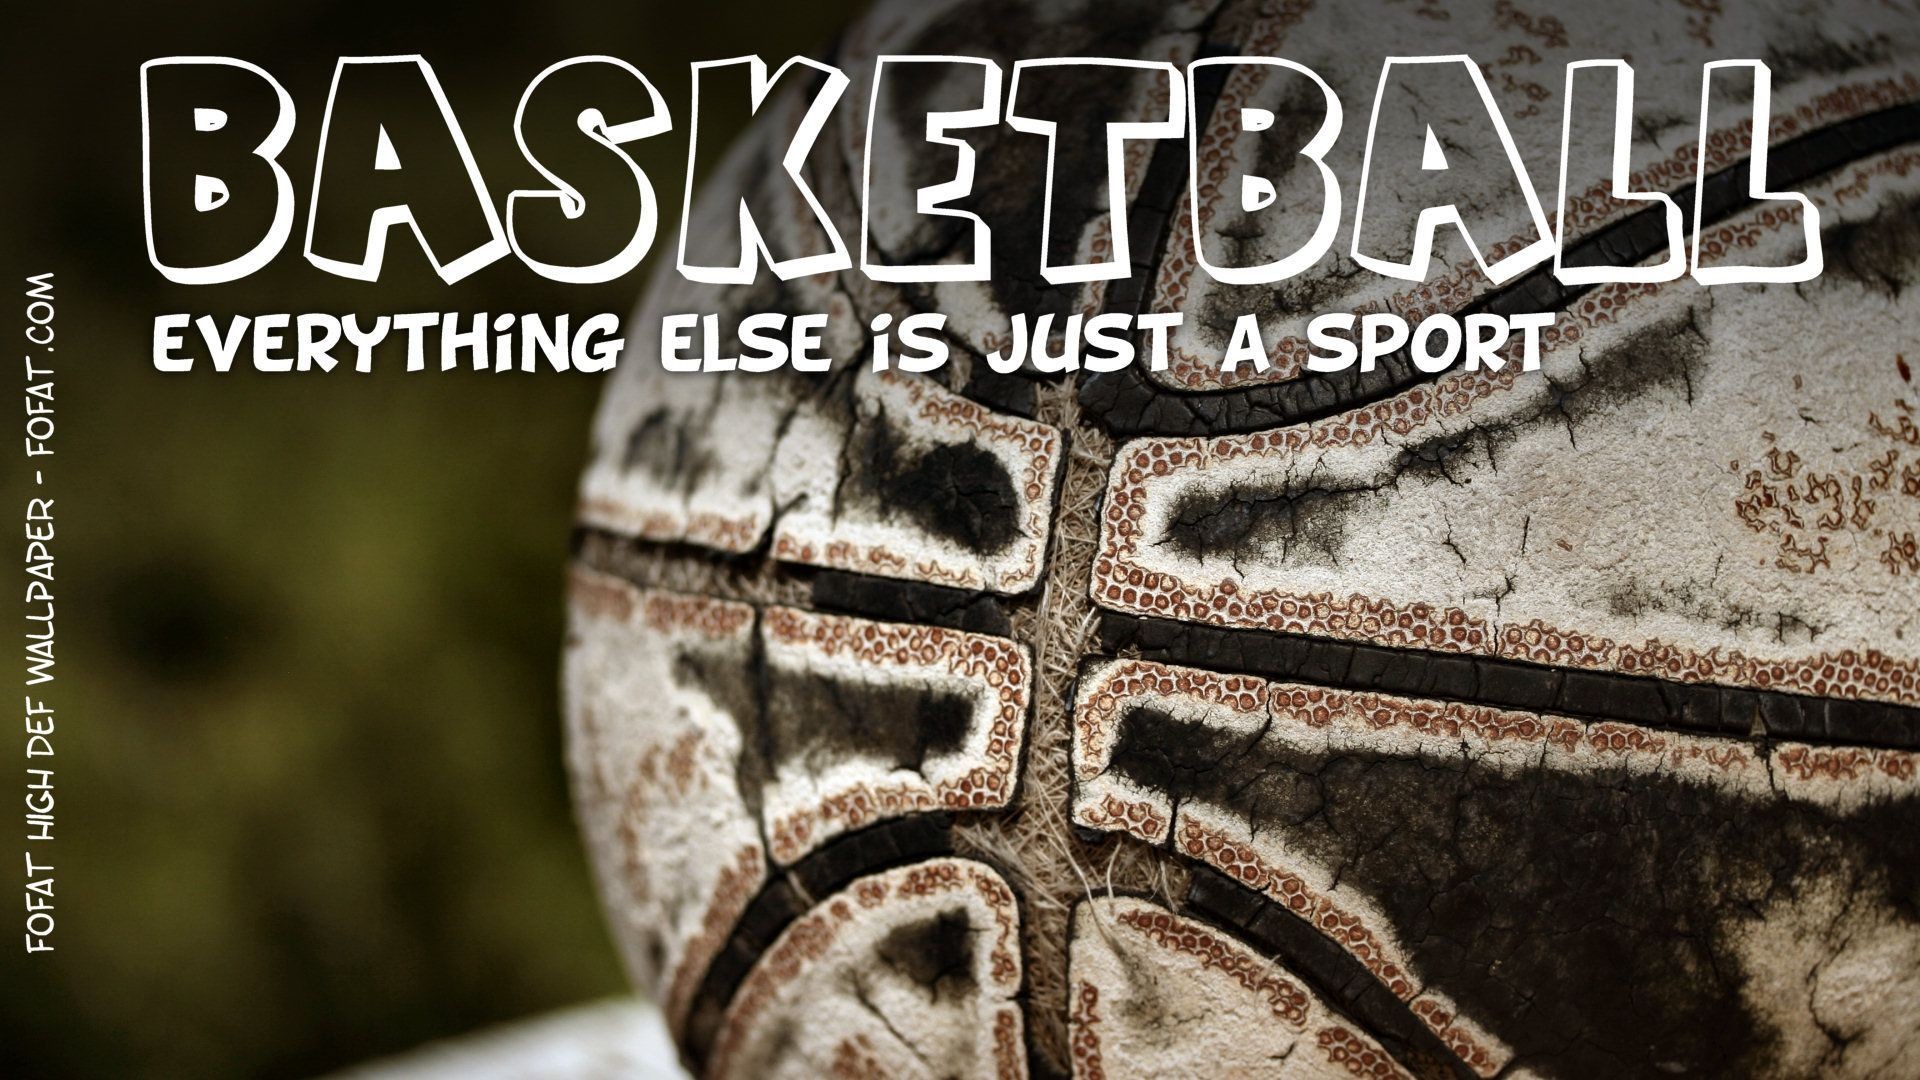 Basketball is life wallpaper wpz093